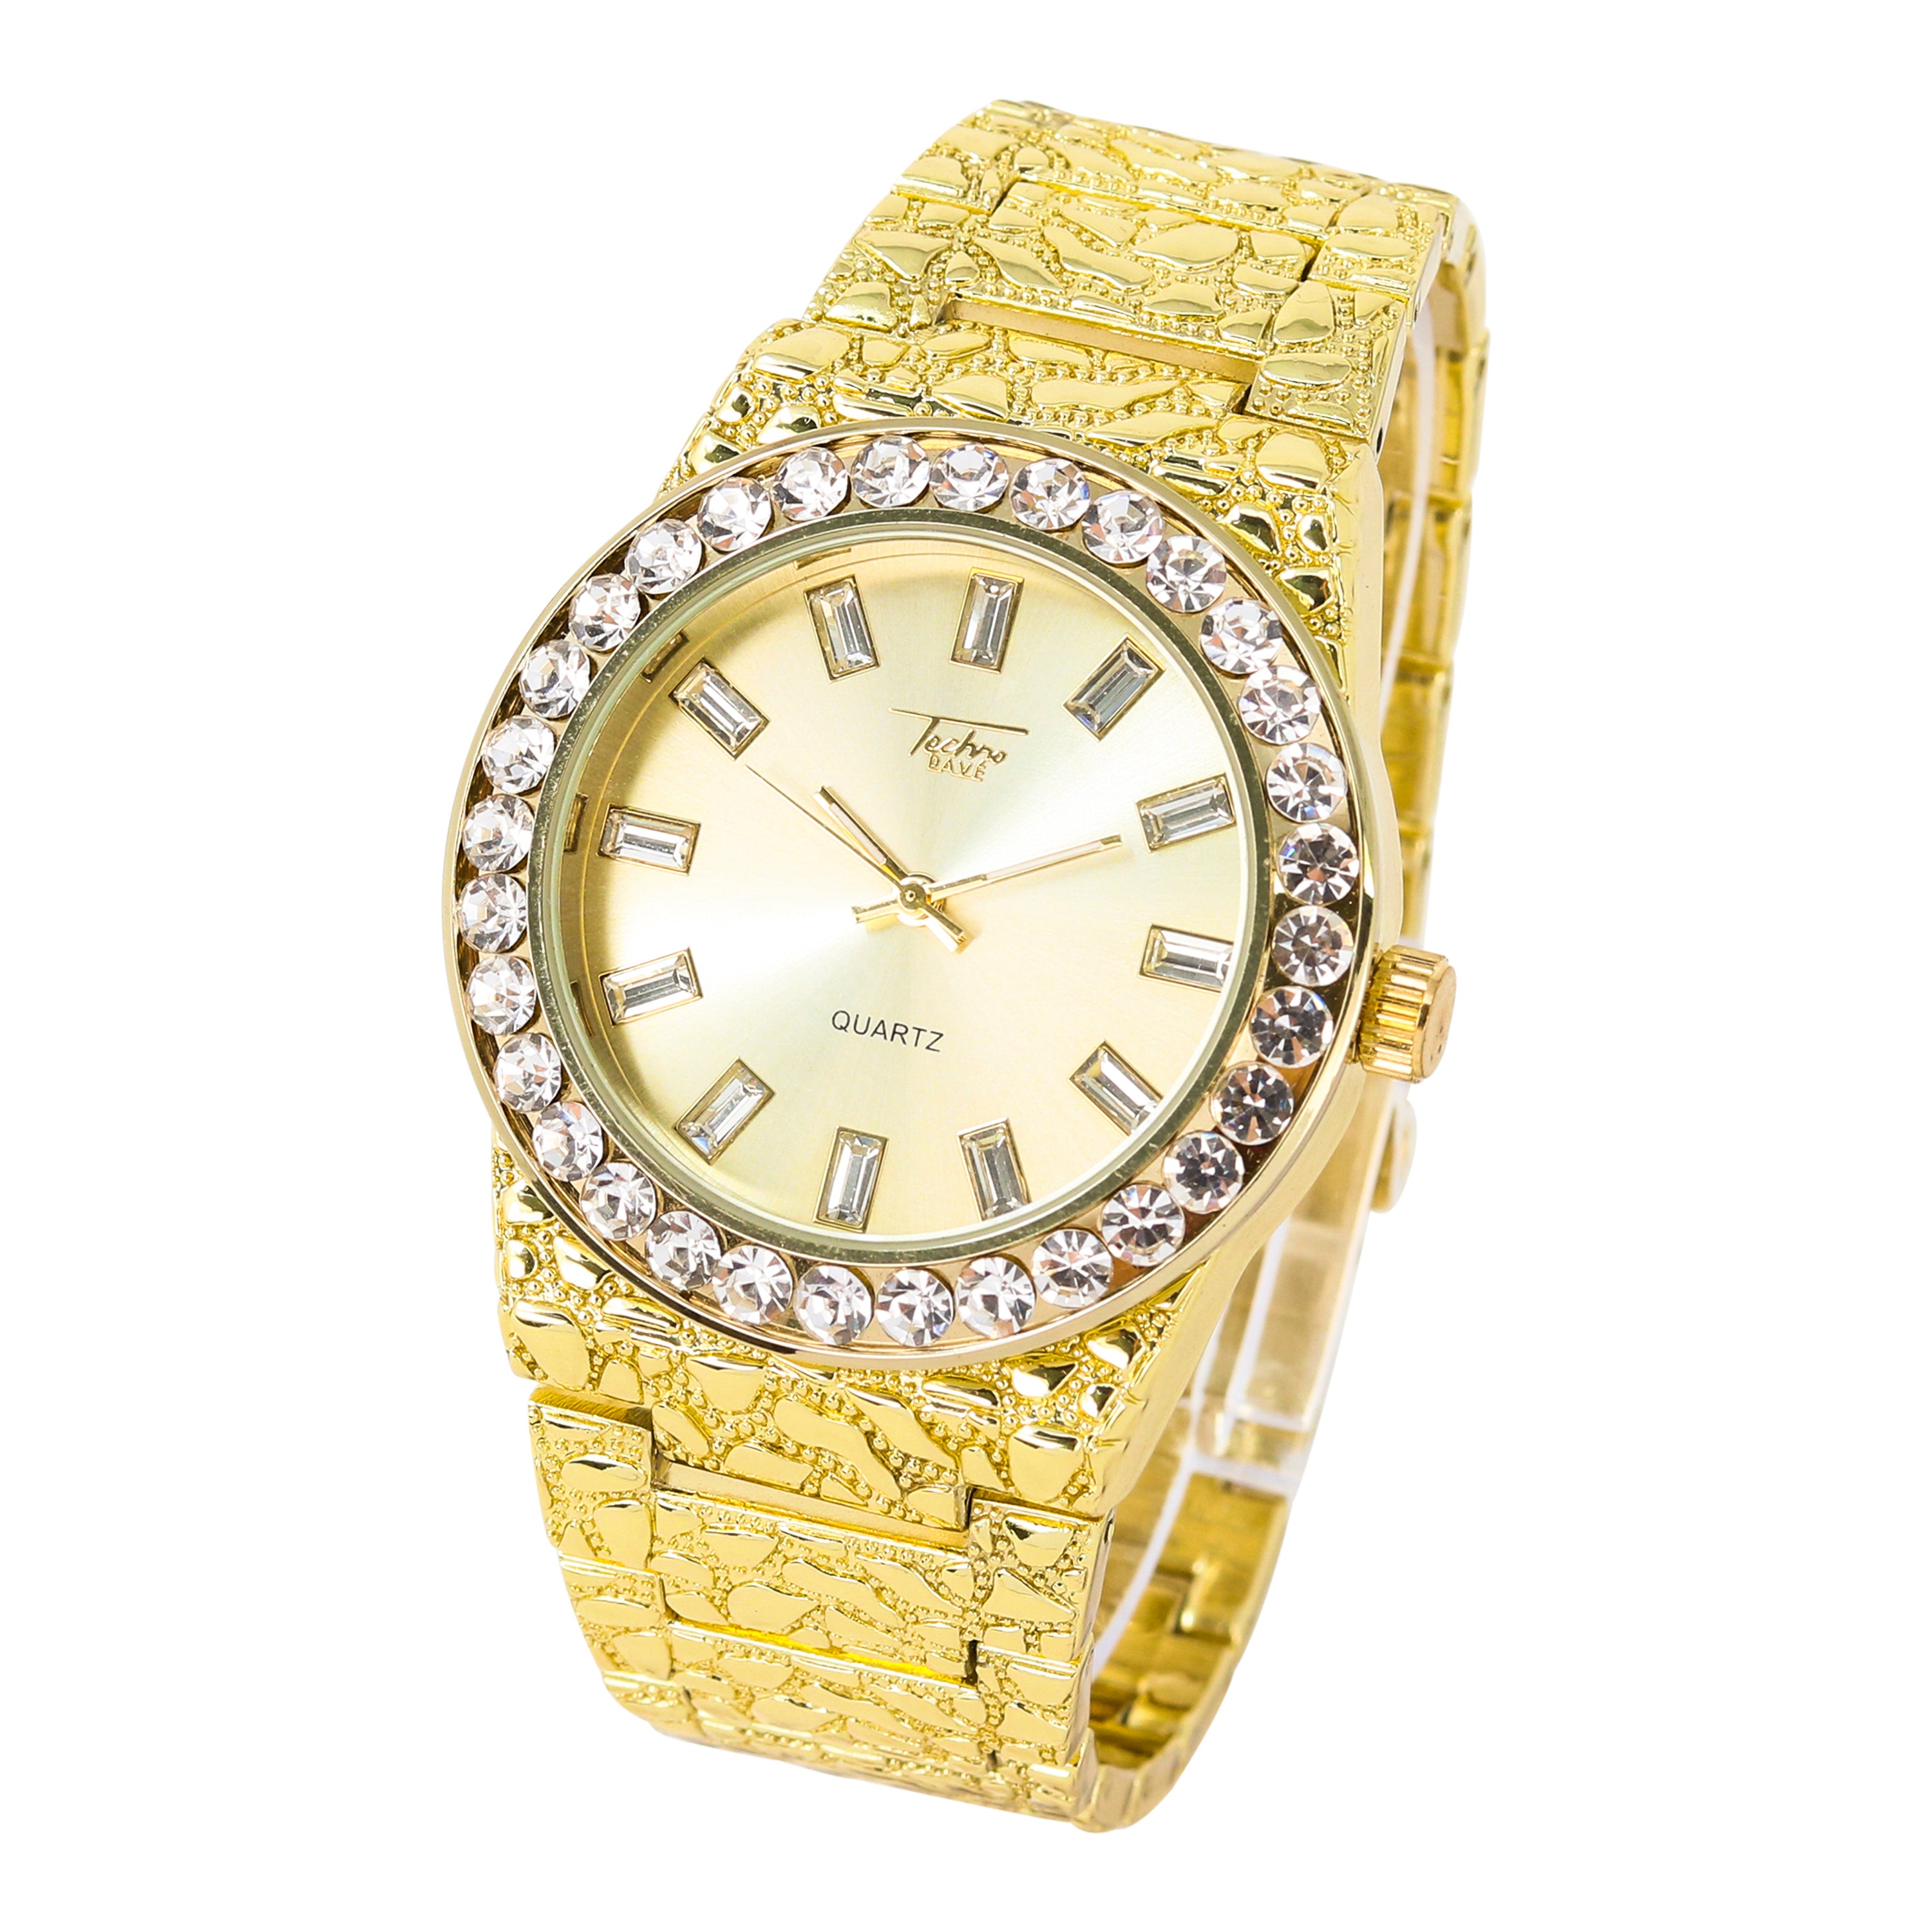 Men's Round Iced Out Watch 43mm Gold - Nugget Band